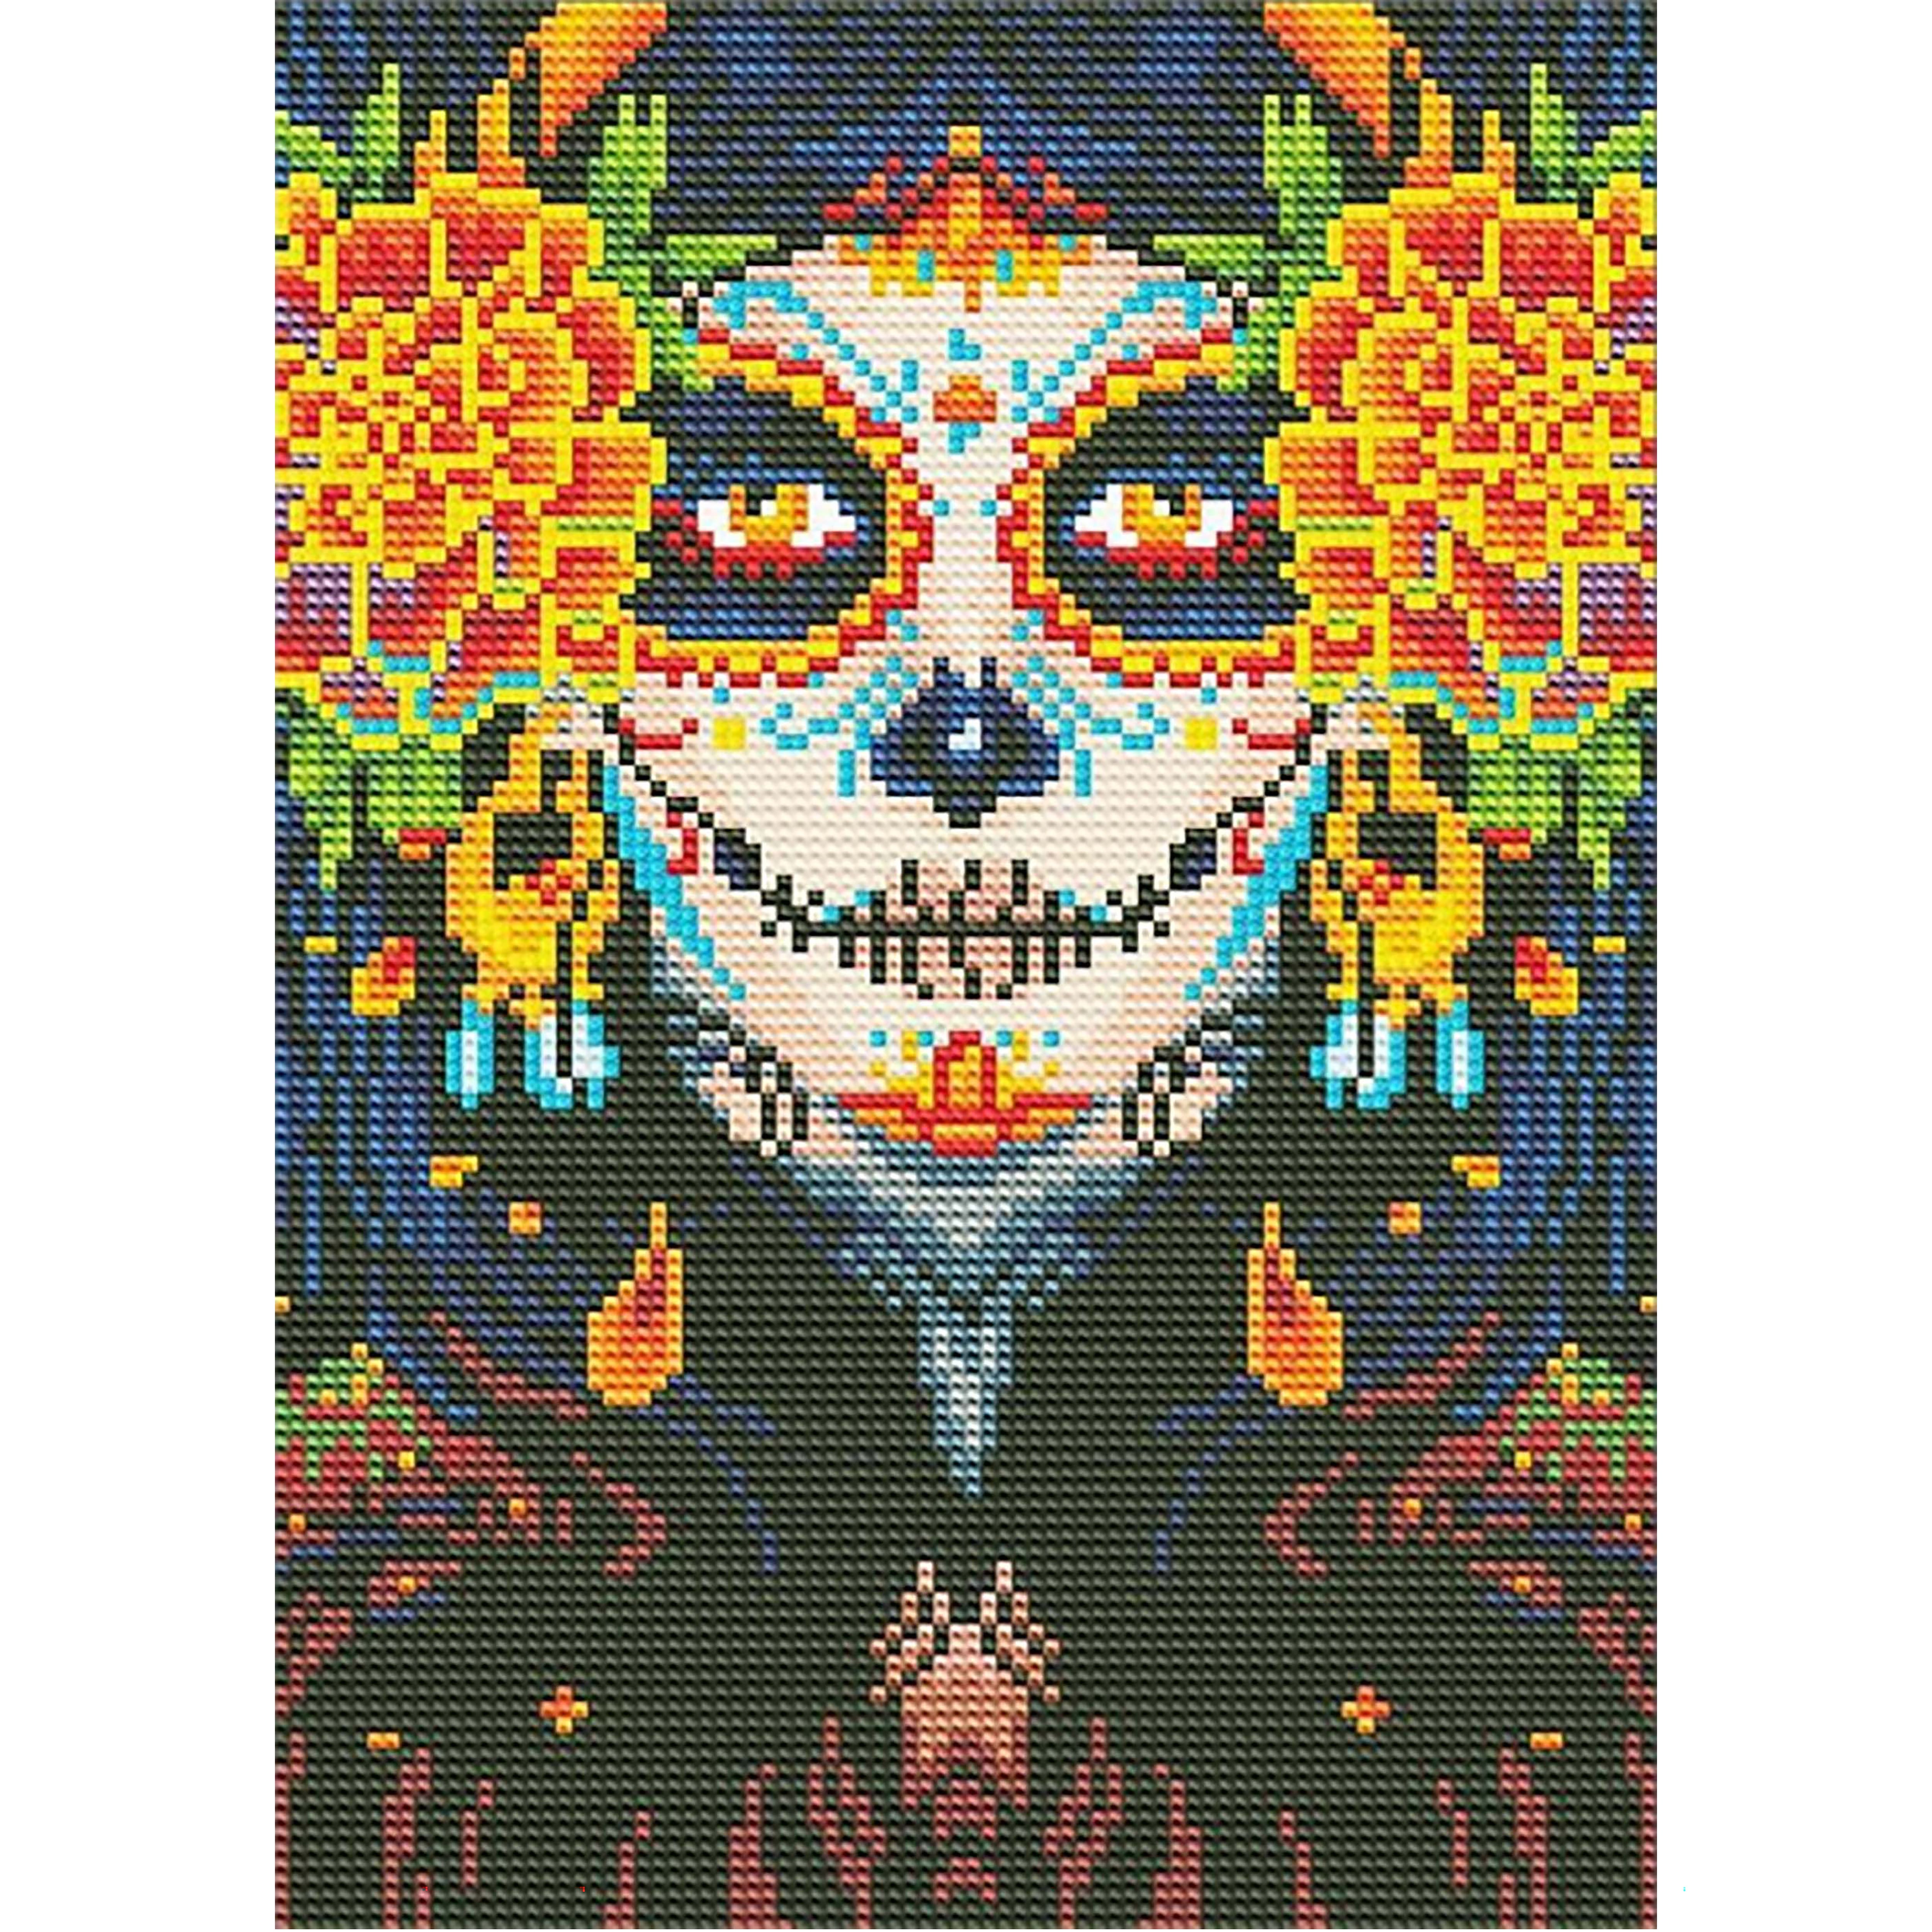 Sparkly Selections Day of the Dead Woman Glow in the Dark Diamond Art Kit